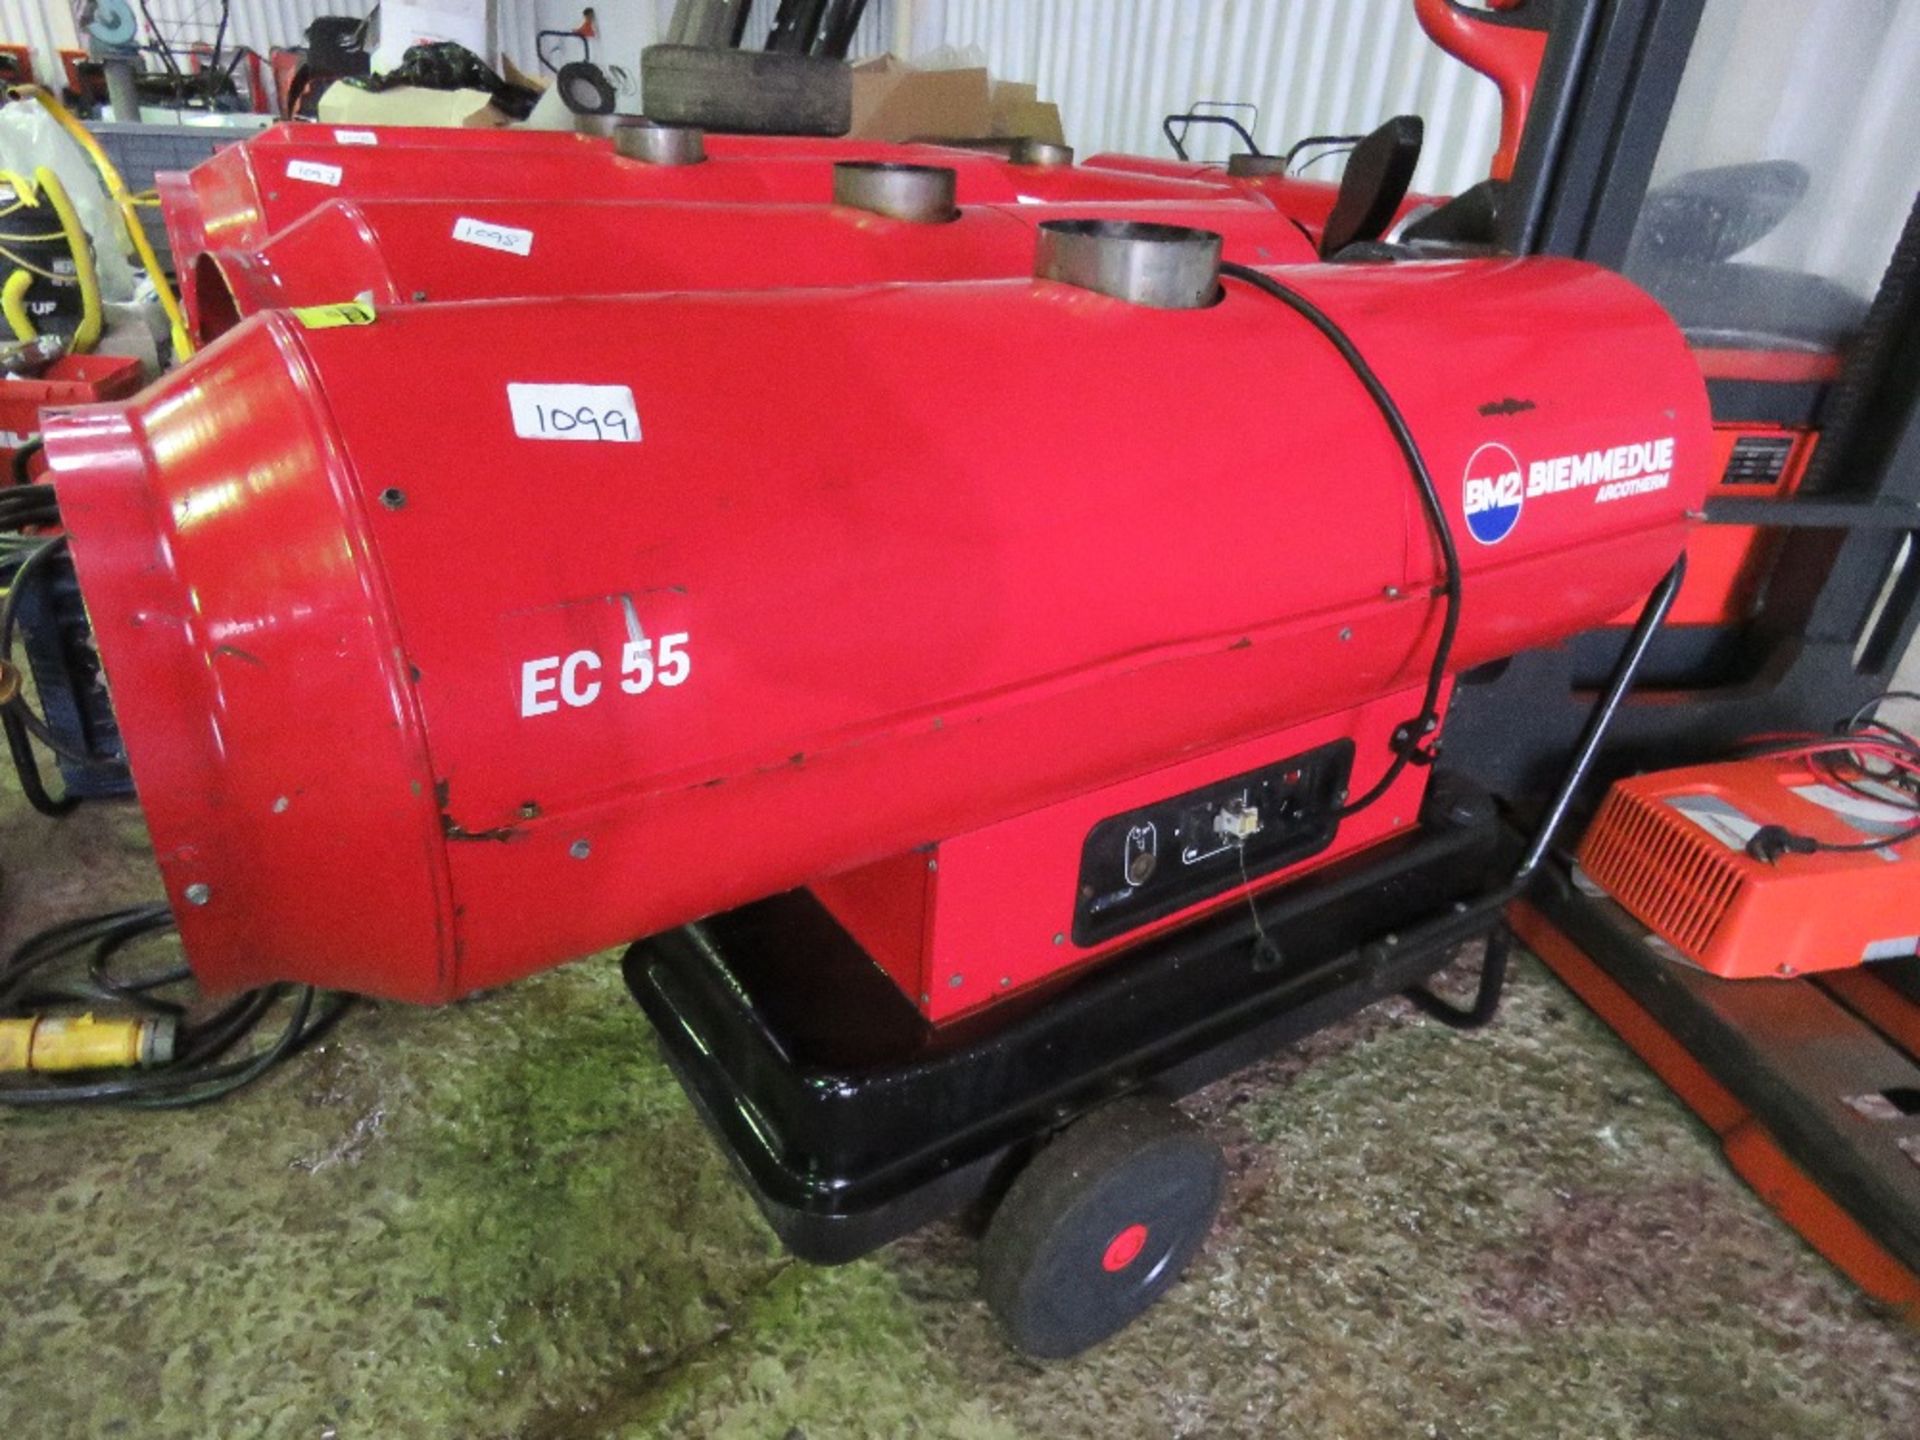 ARCOTHERM EC55 DIESEL POWERED SPACE HEATER, DUAL VOLTAGE POWERED.